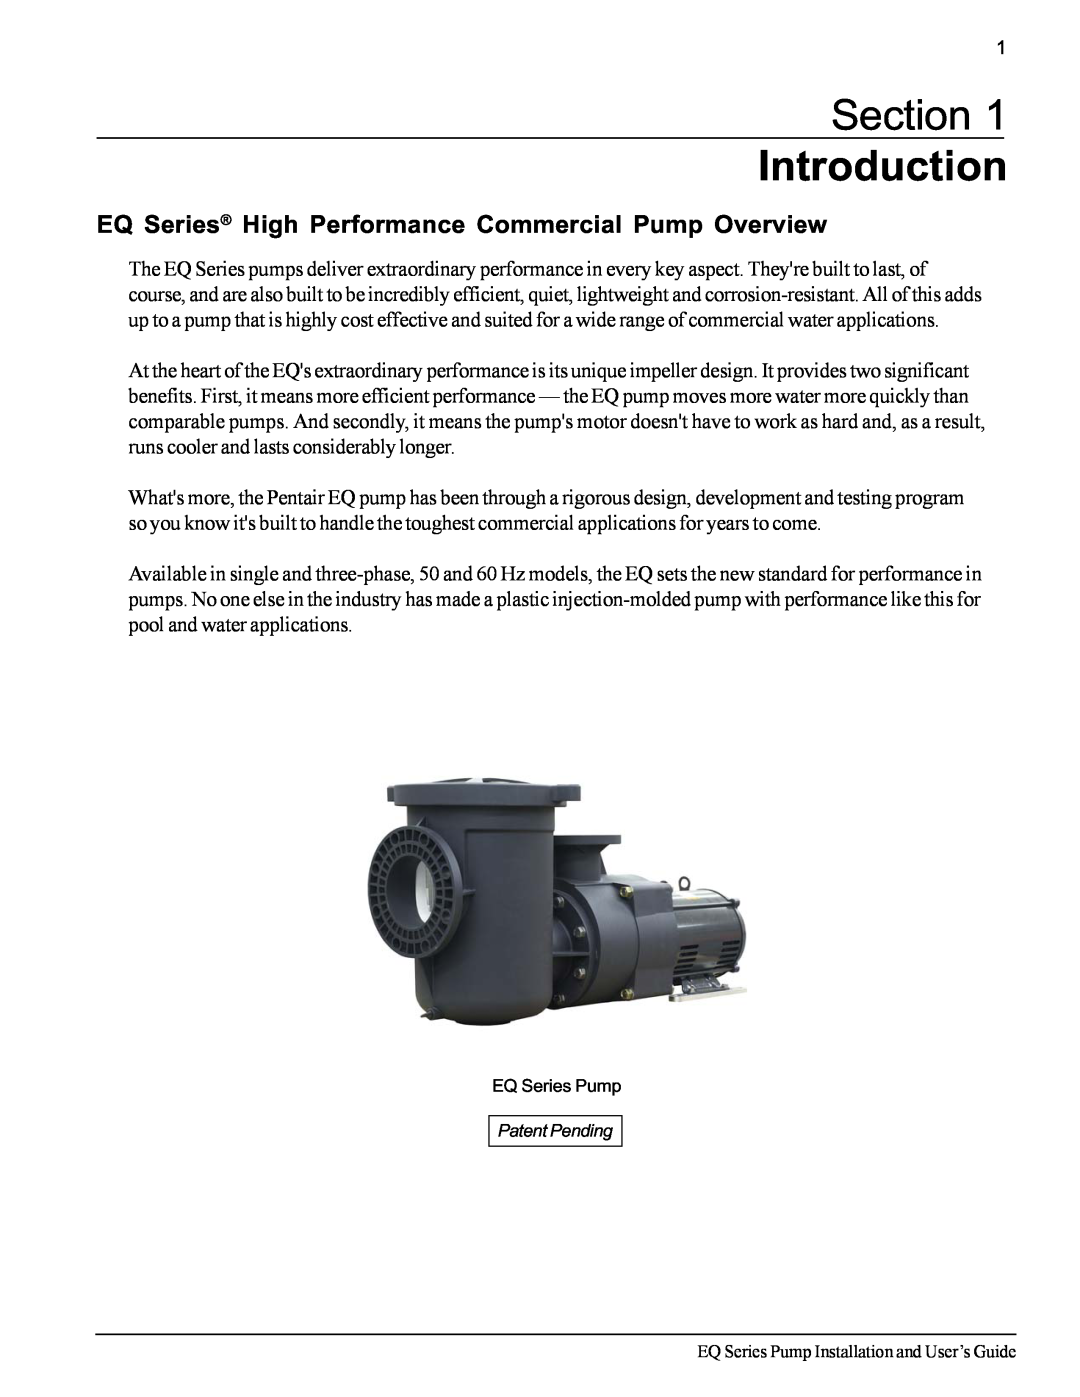 Pentair EQ SERIES important safety instructions Section Introduction, EQ Series High Performance Commercial Pump Overview 